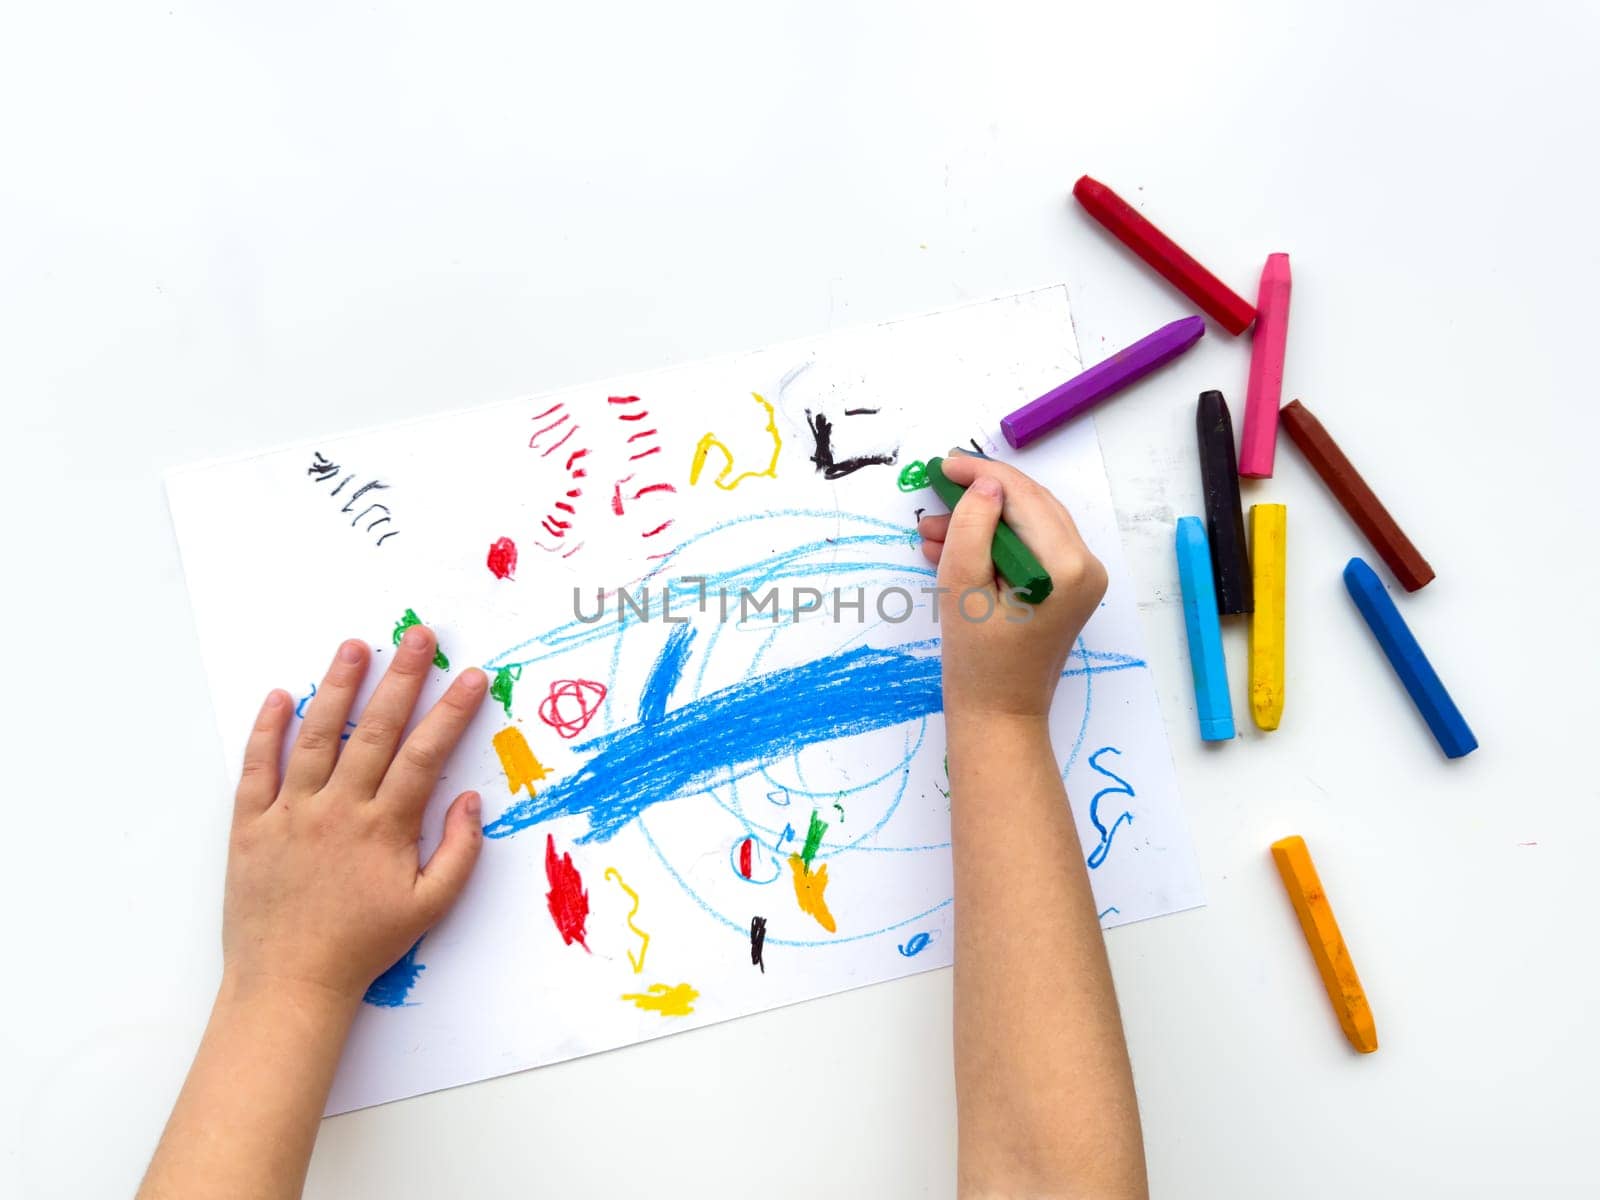 Childs hands drawing with colorful wax crayons on white paper, top view. Creative art concept for educational and developmental activities. High quality photo